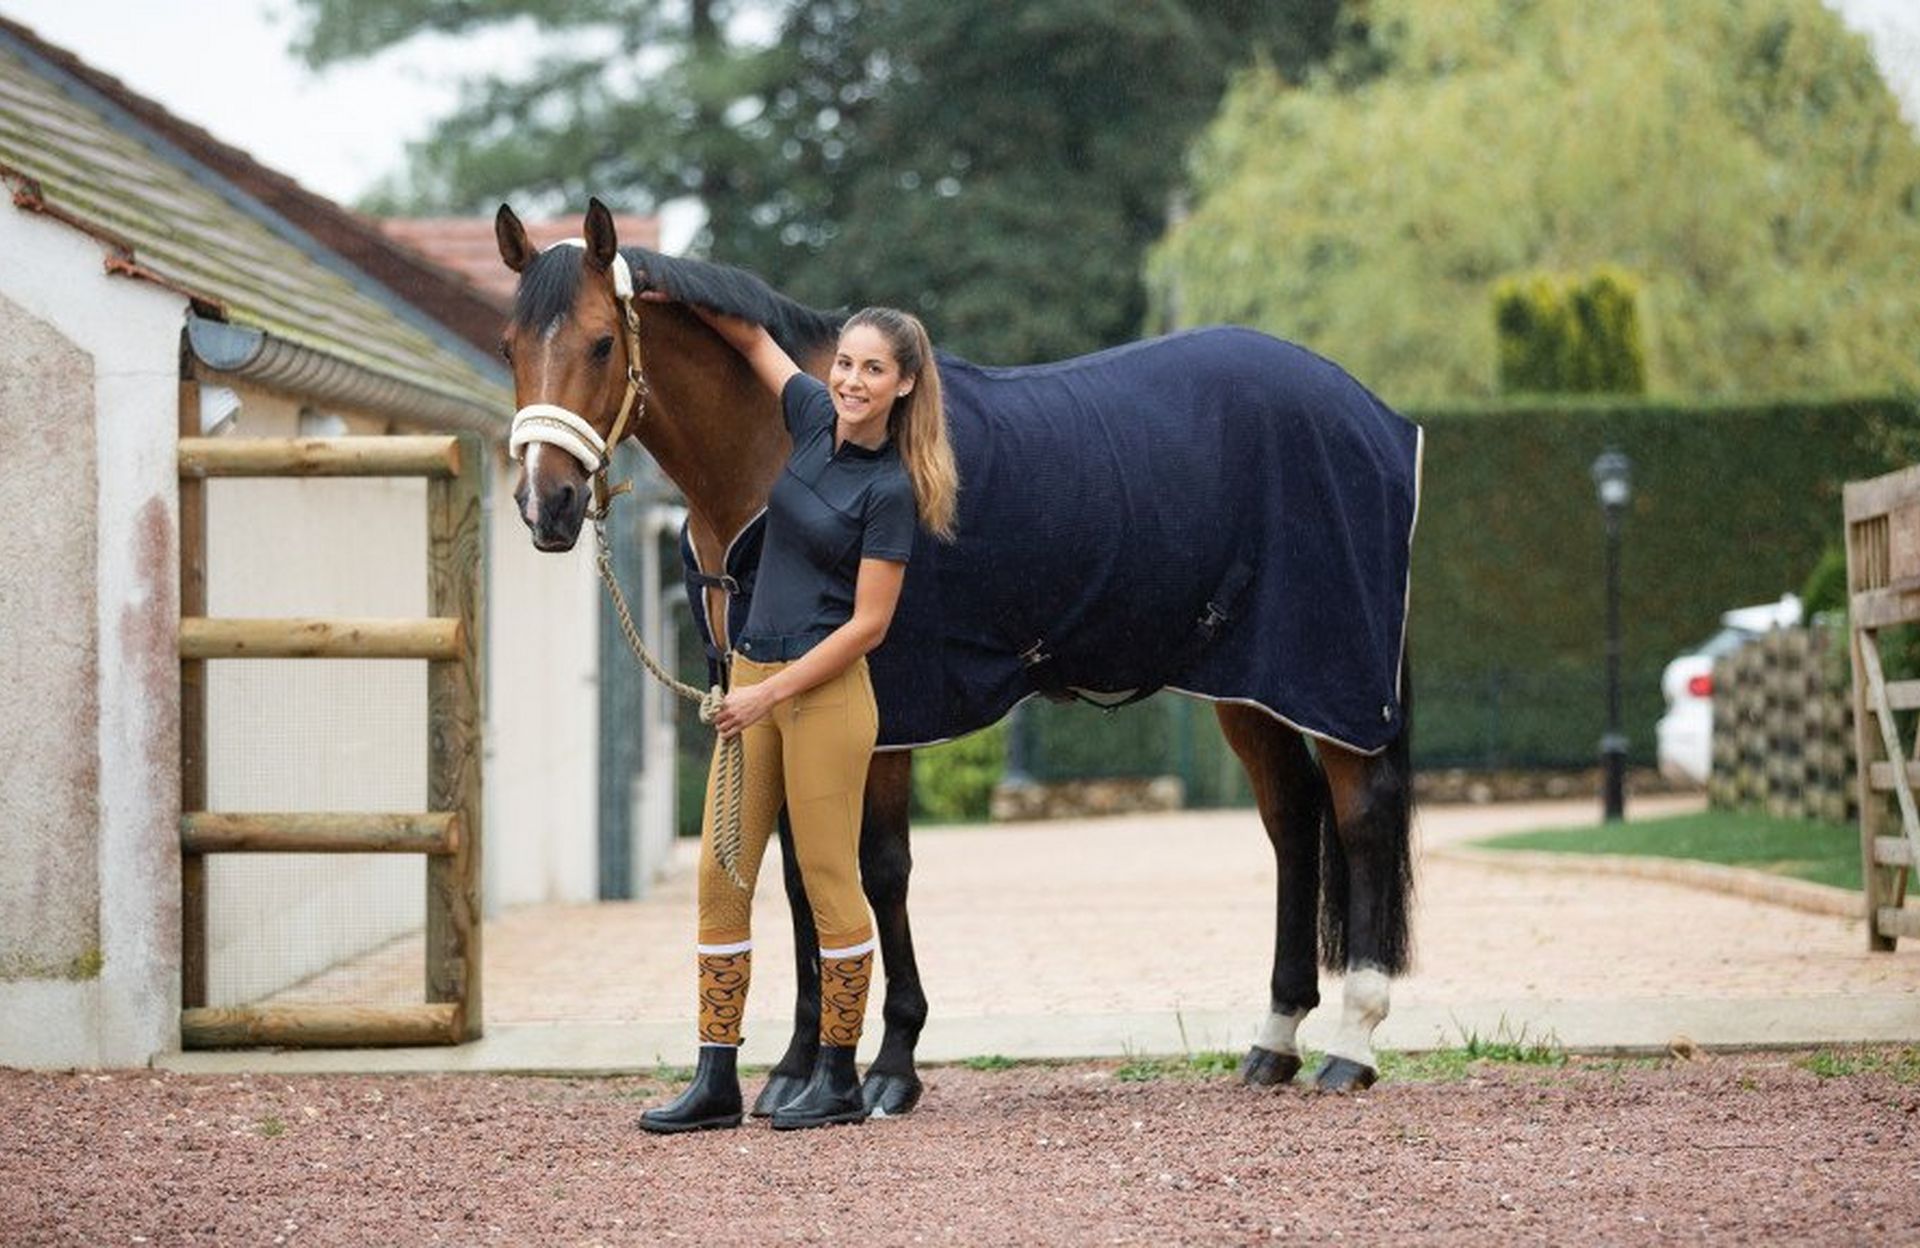 Horse Rugs - How to measure correctly